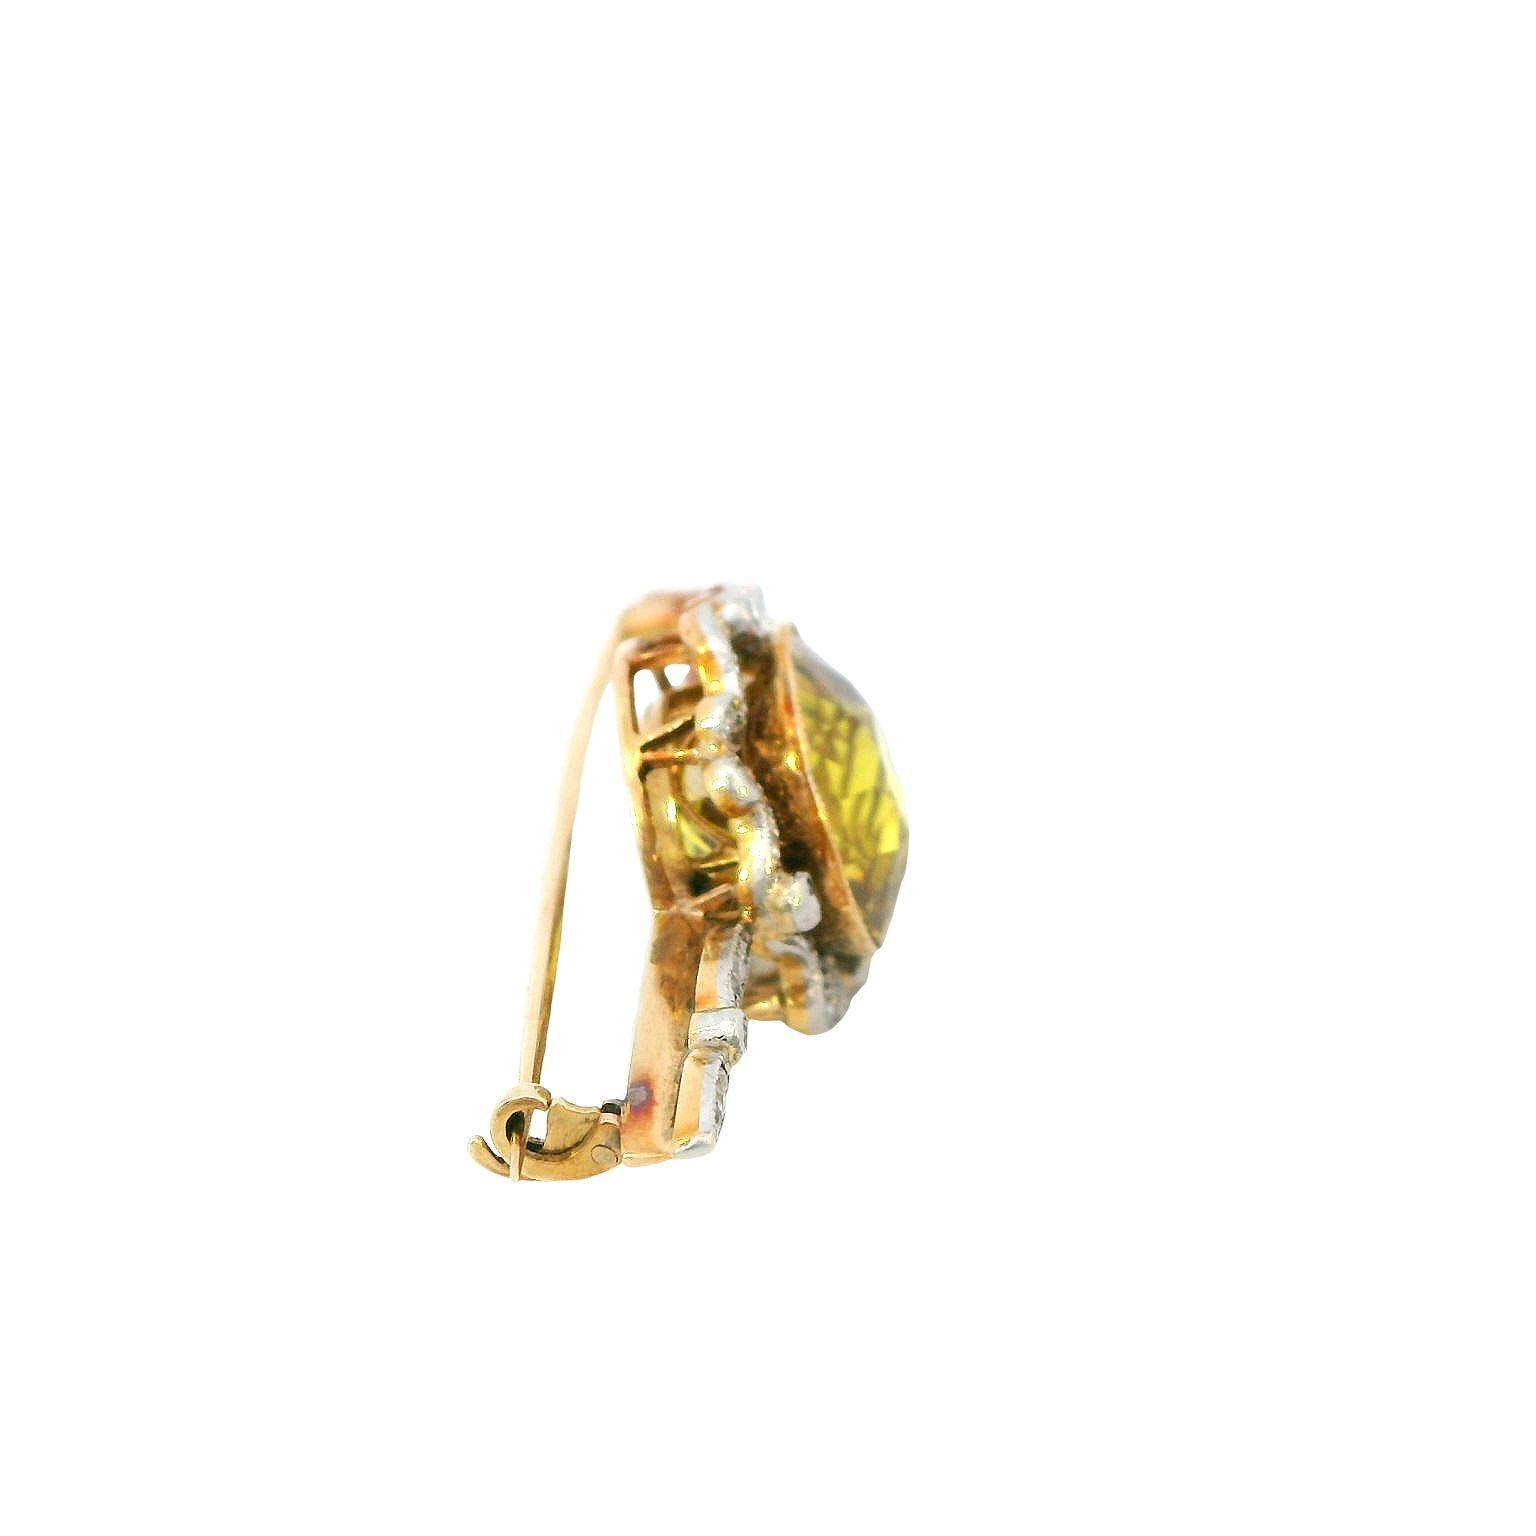 Introducing our exquisite Natural Yellow Sapphire and Diamond Brooch that holds a rich history of over 100 years., a timeless masterpiece steeped in history and elegance. Crafted with meticulous attention to detail, this brooch features a